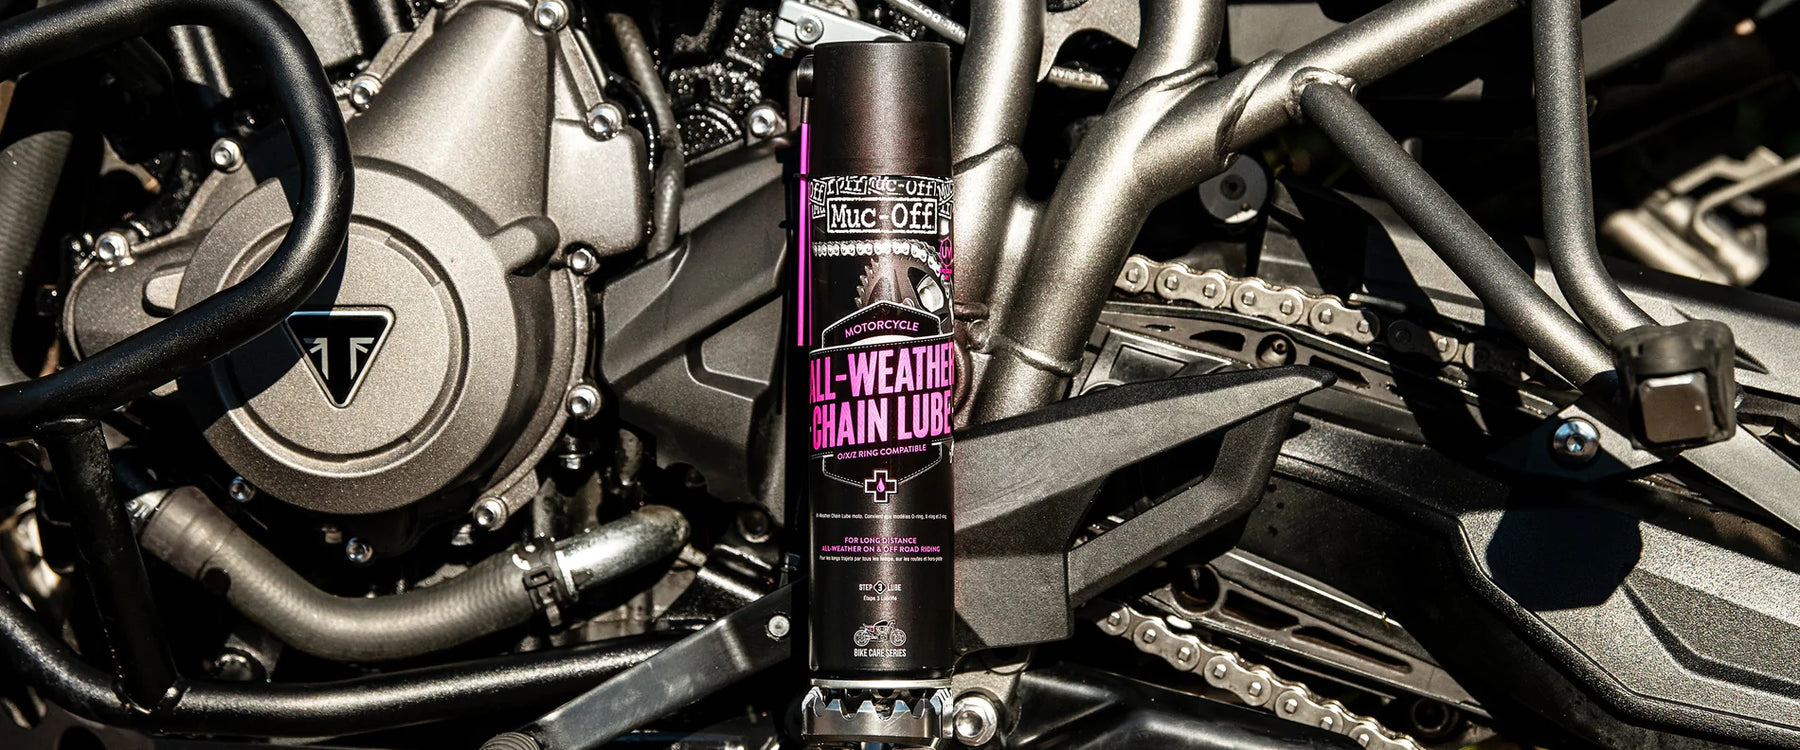 MUC-OFF Motorcycle All-Weather Chain Lube 400ml